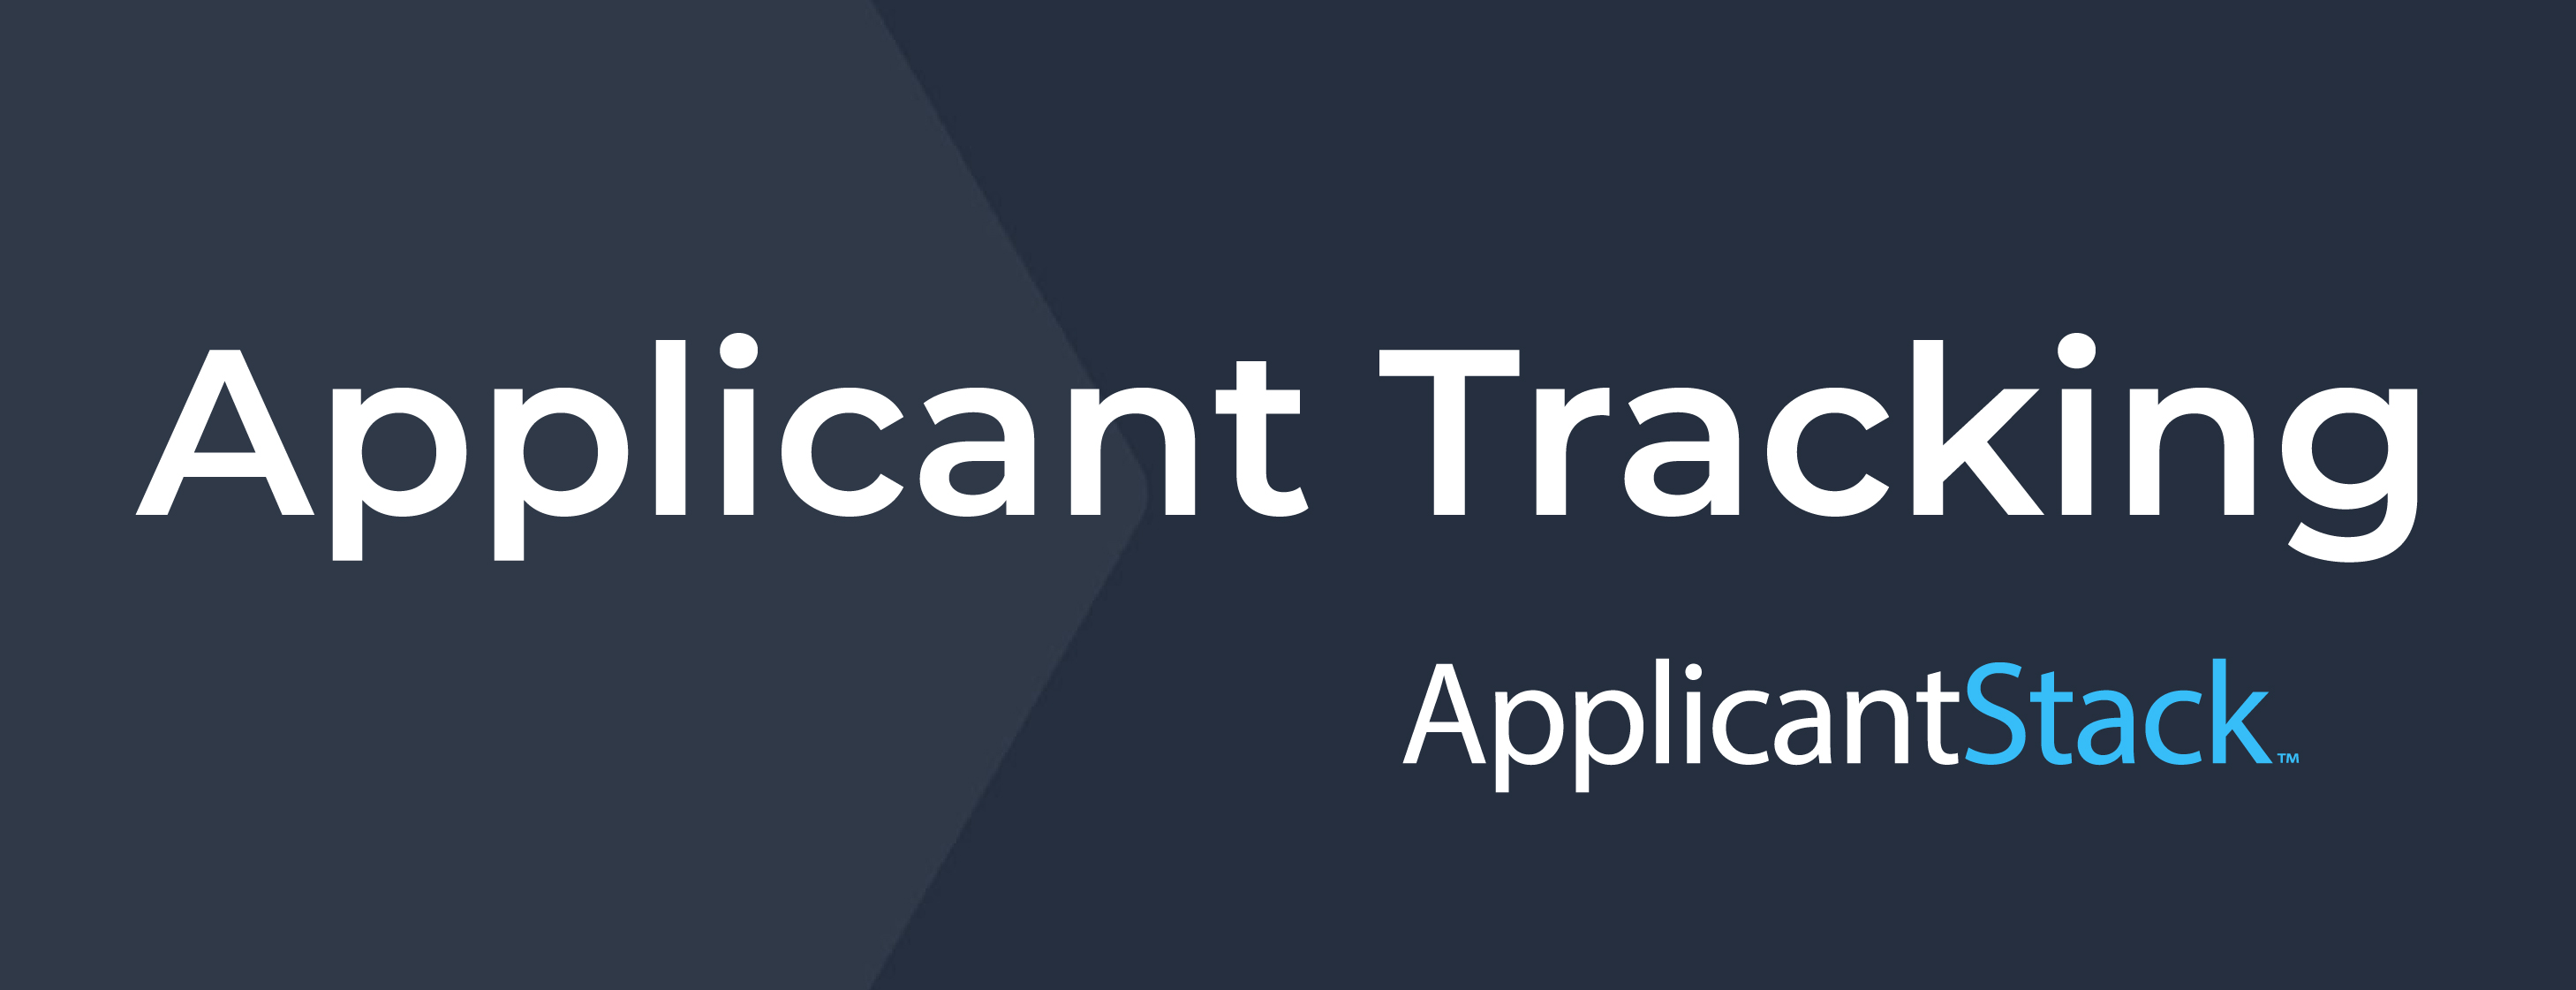 Category-header_Applicant-Tracking-01